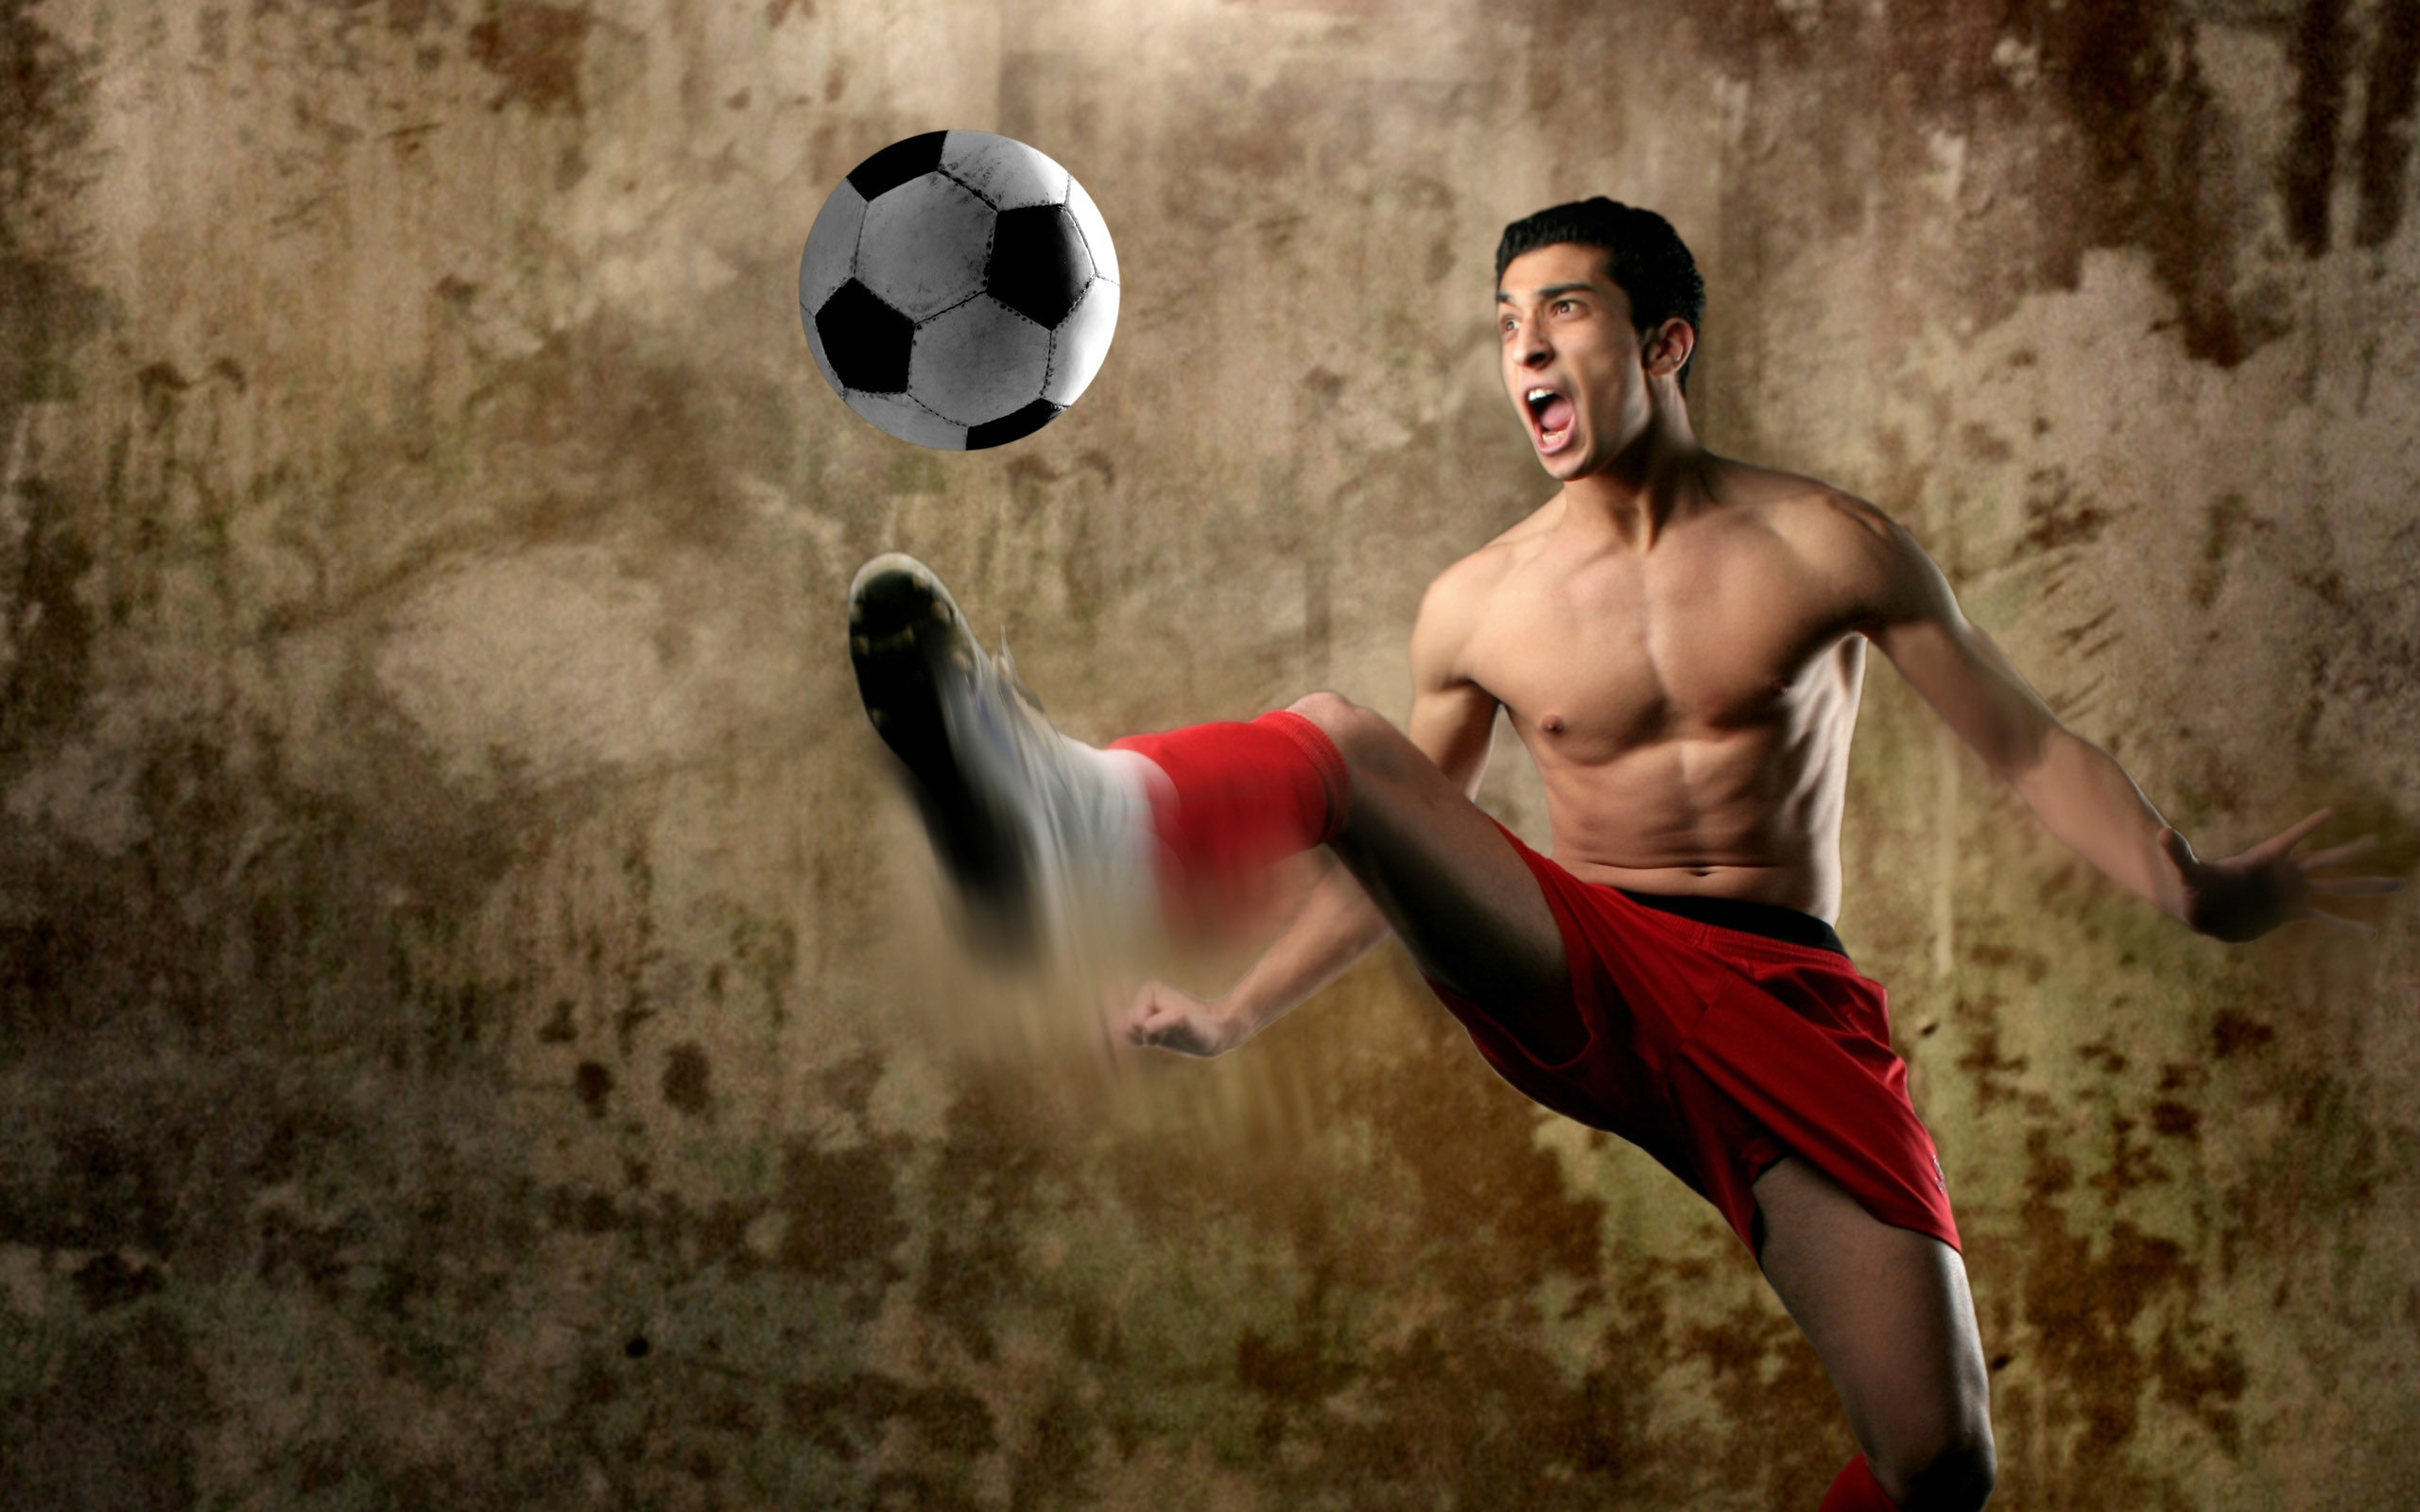 Cool Soccer Pictures HD Wallpapers Backgrounds of Your Choice